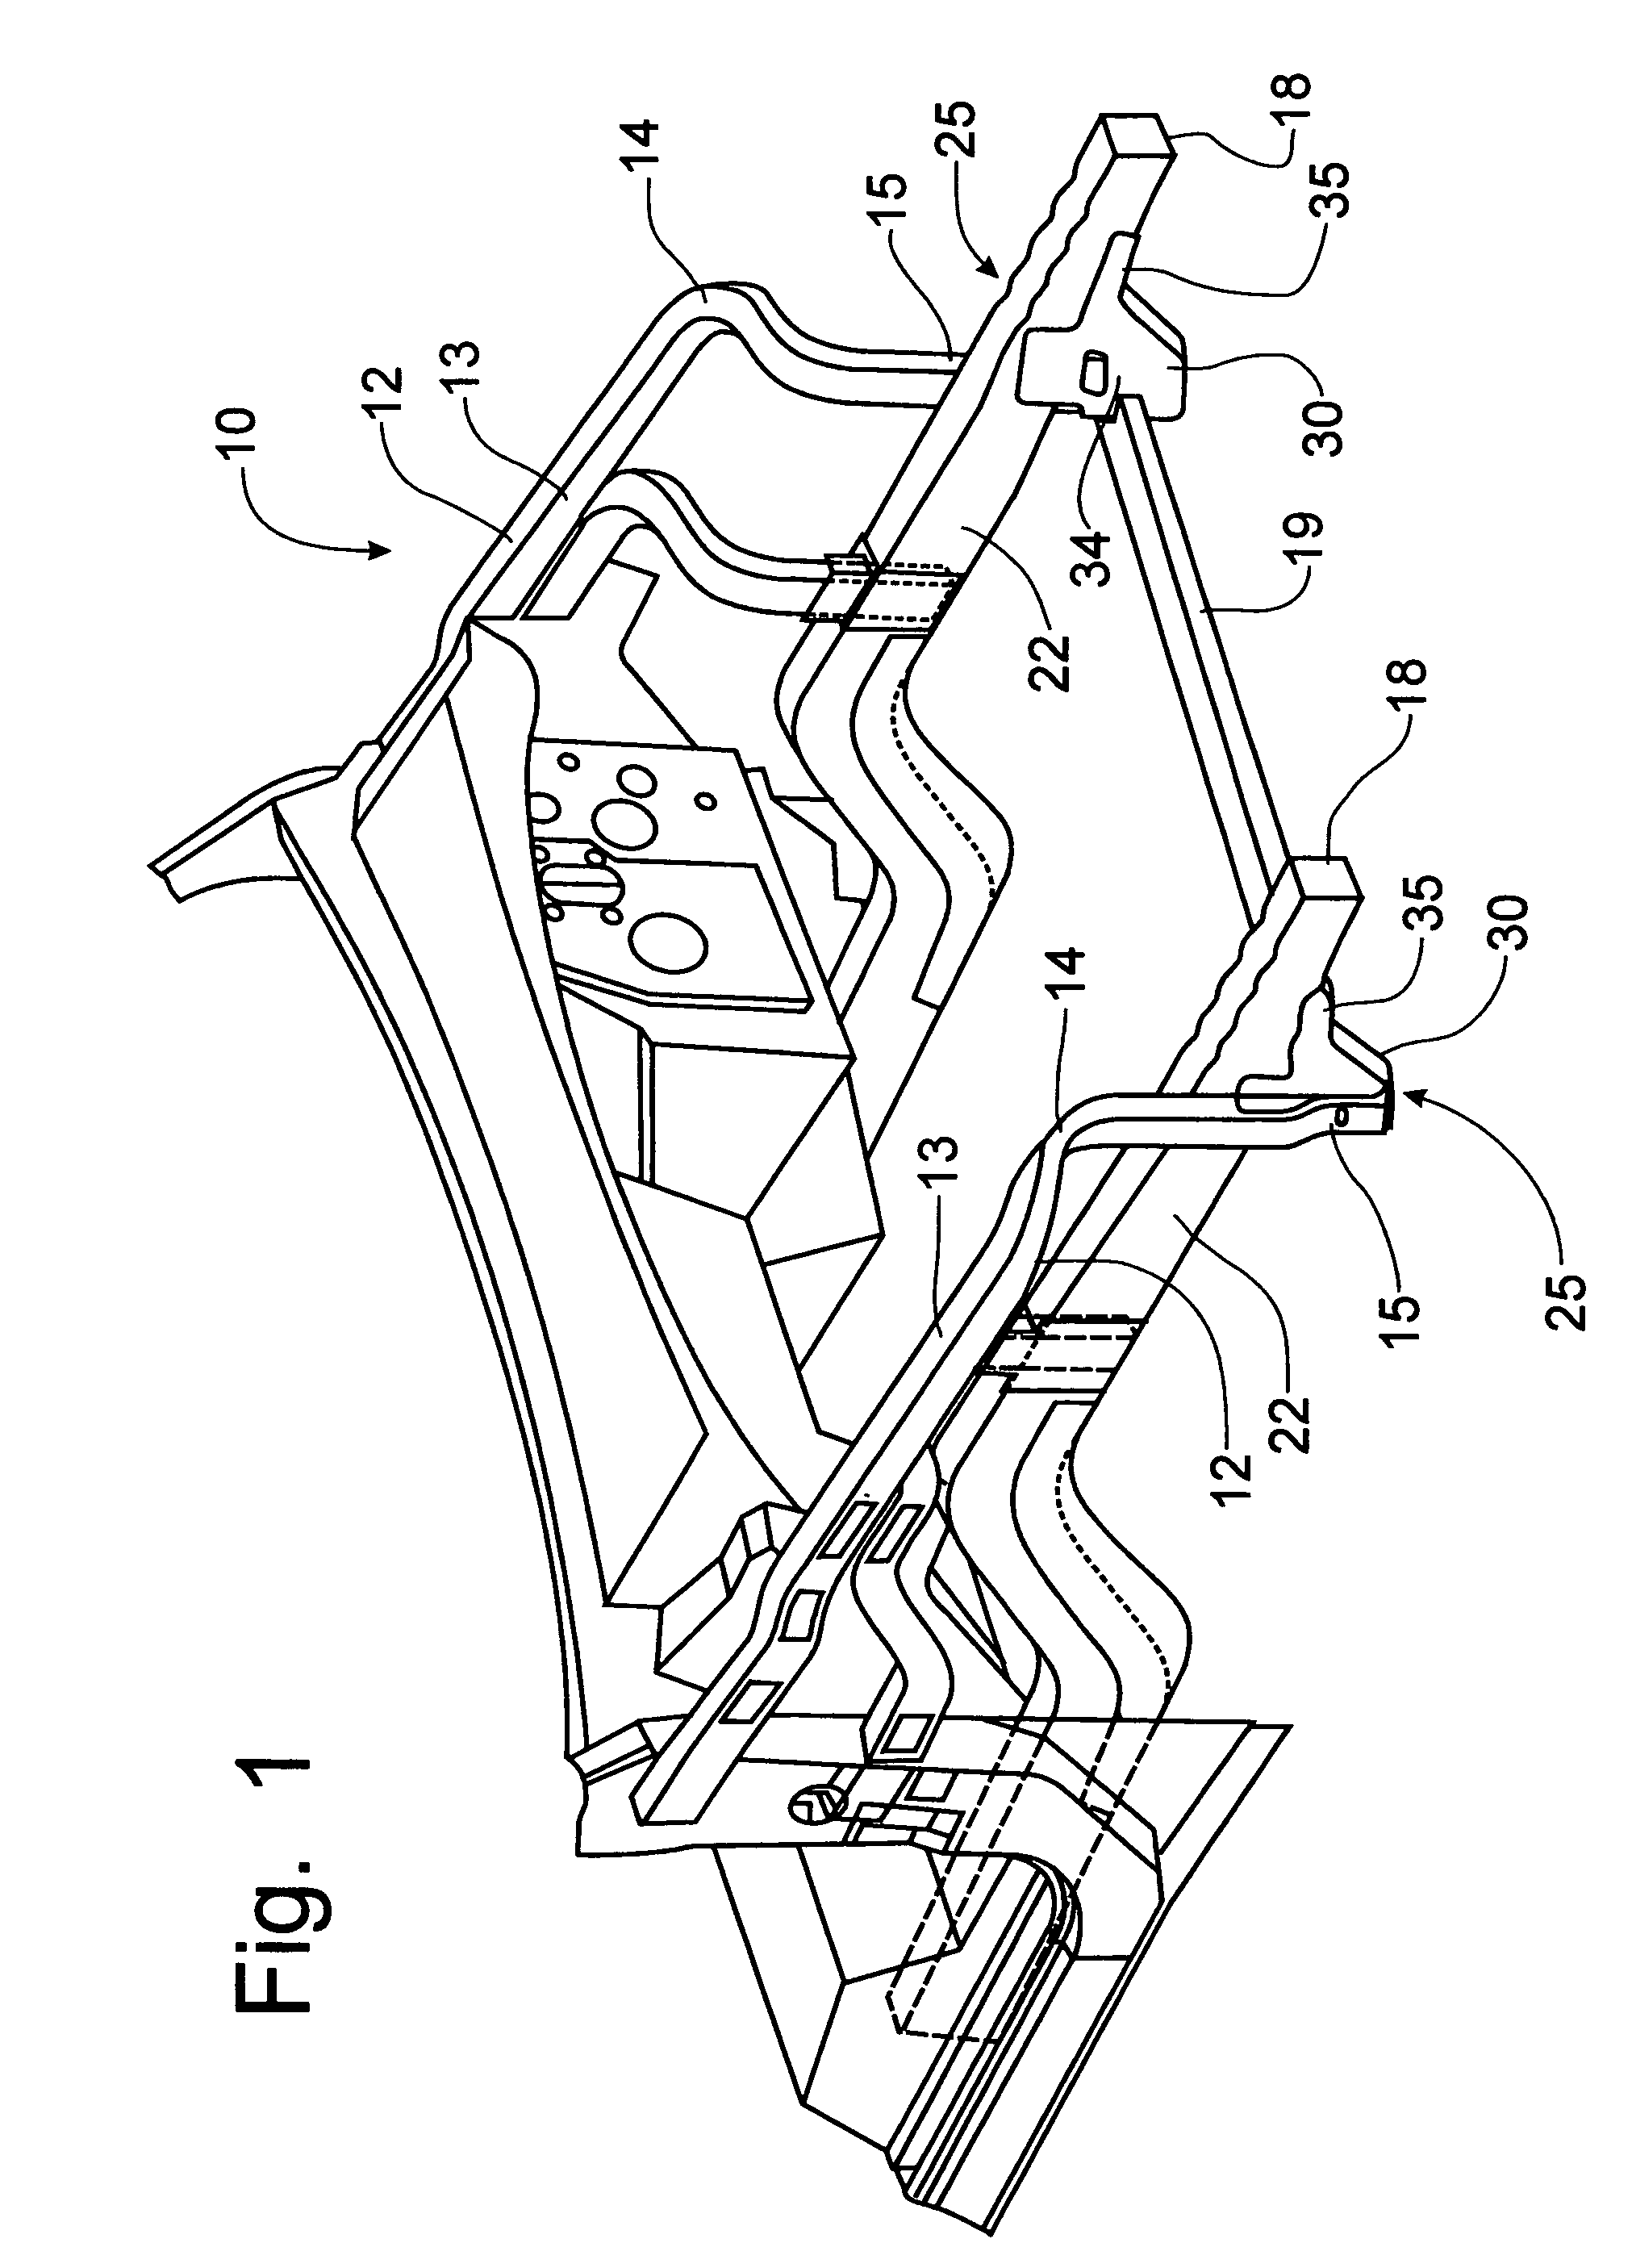 Double cell crushable joint for automotive front end